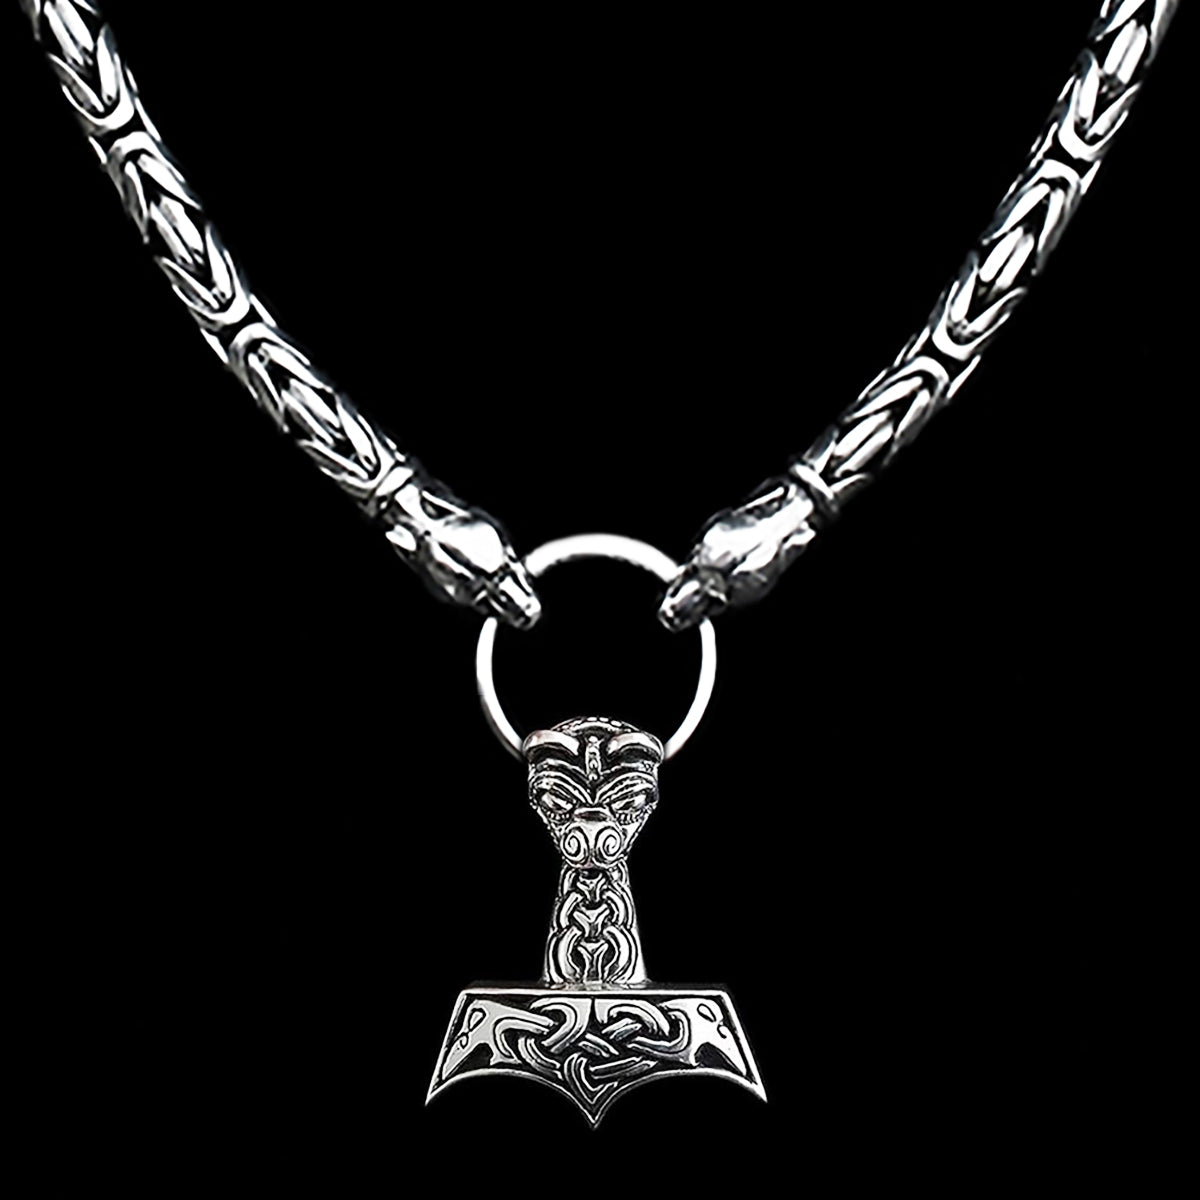 8mm Thick Silver Thor's Hammer Necklace with Ferocious Wolf Heads - Split Ring - AD2 Large Ferocious Thors Hammer